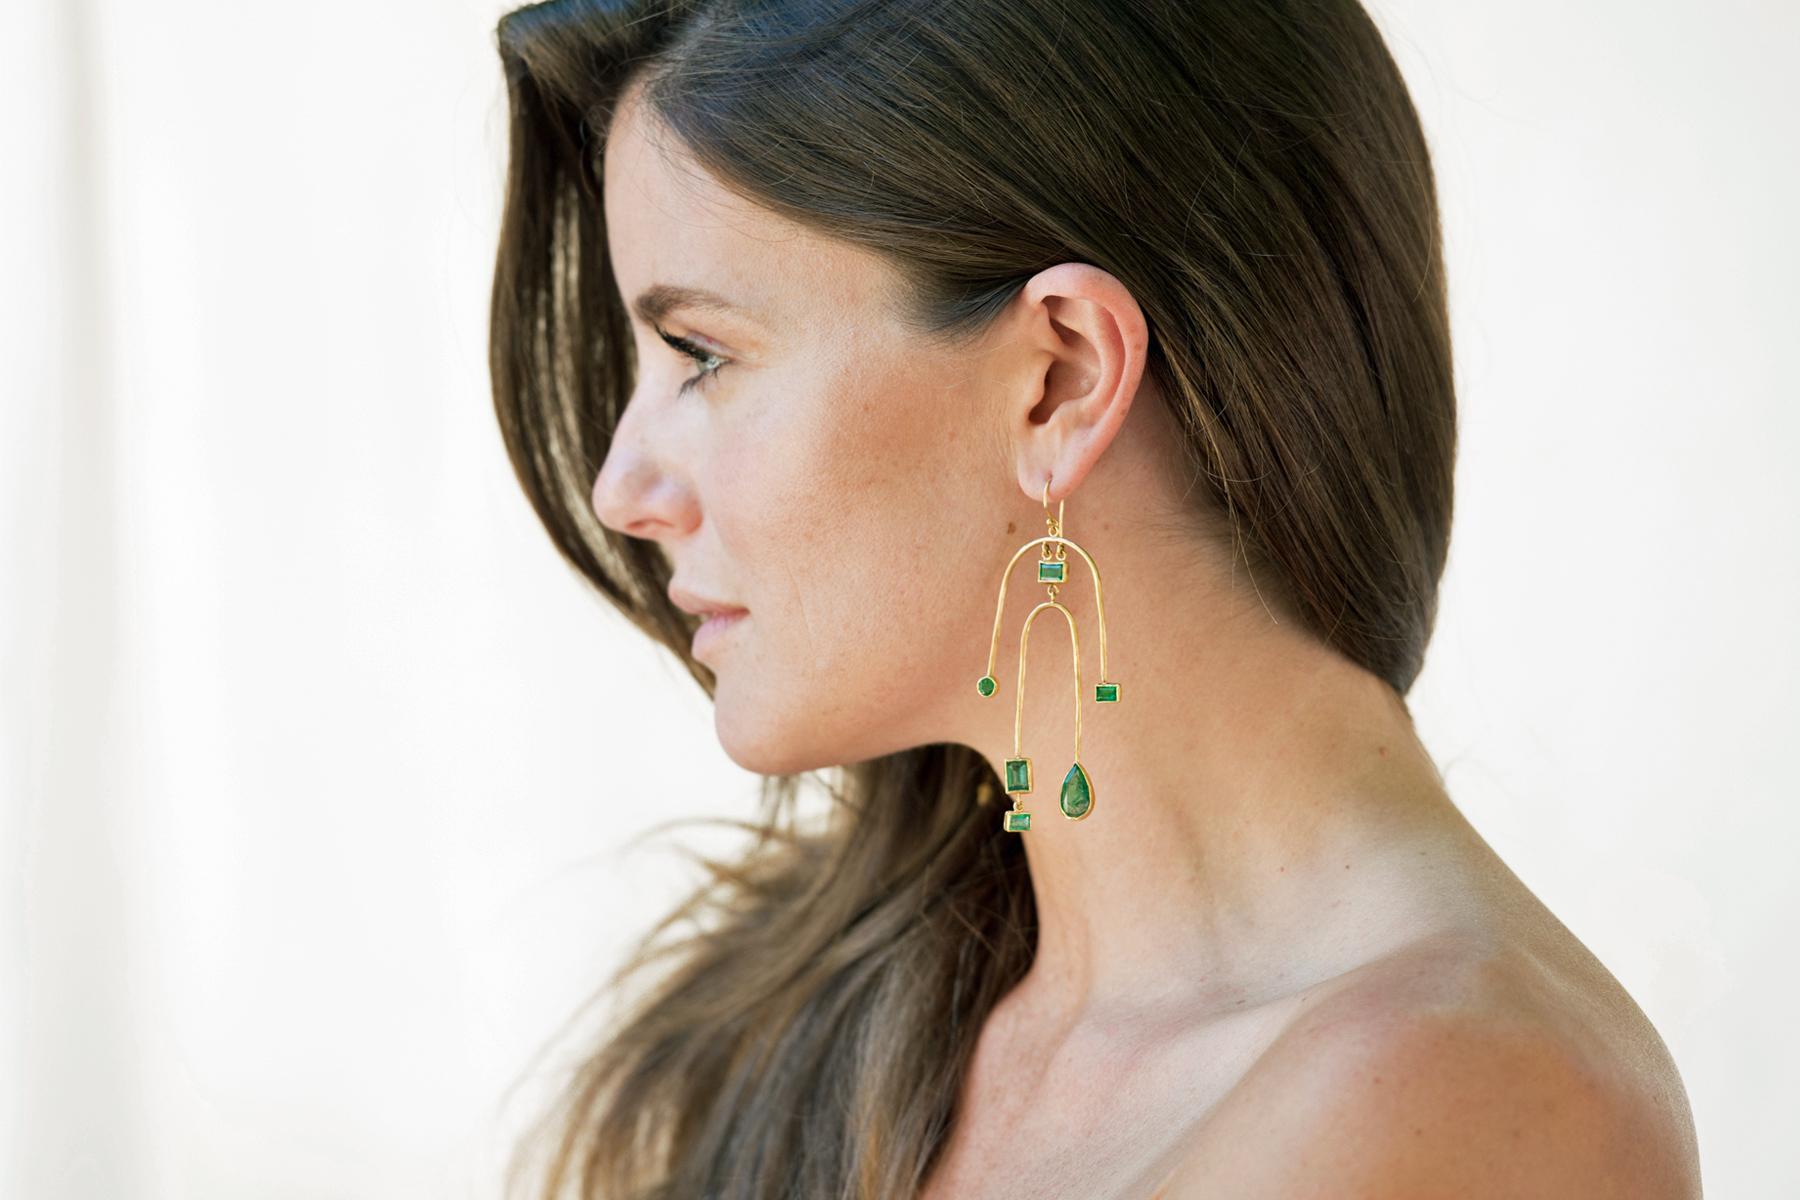 This one of a kind pair of earrings is part of our Artemis Collection.  The collection has its roots in mid century modern aesthetic with a very modern approach. We believe the collection reflects the modernity, strength, and individuality that